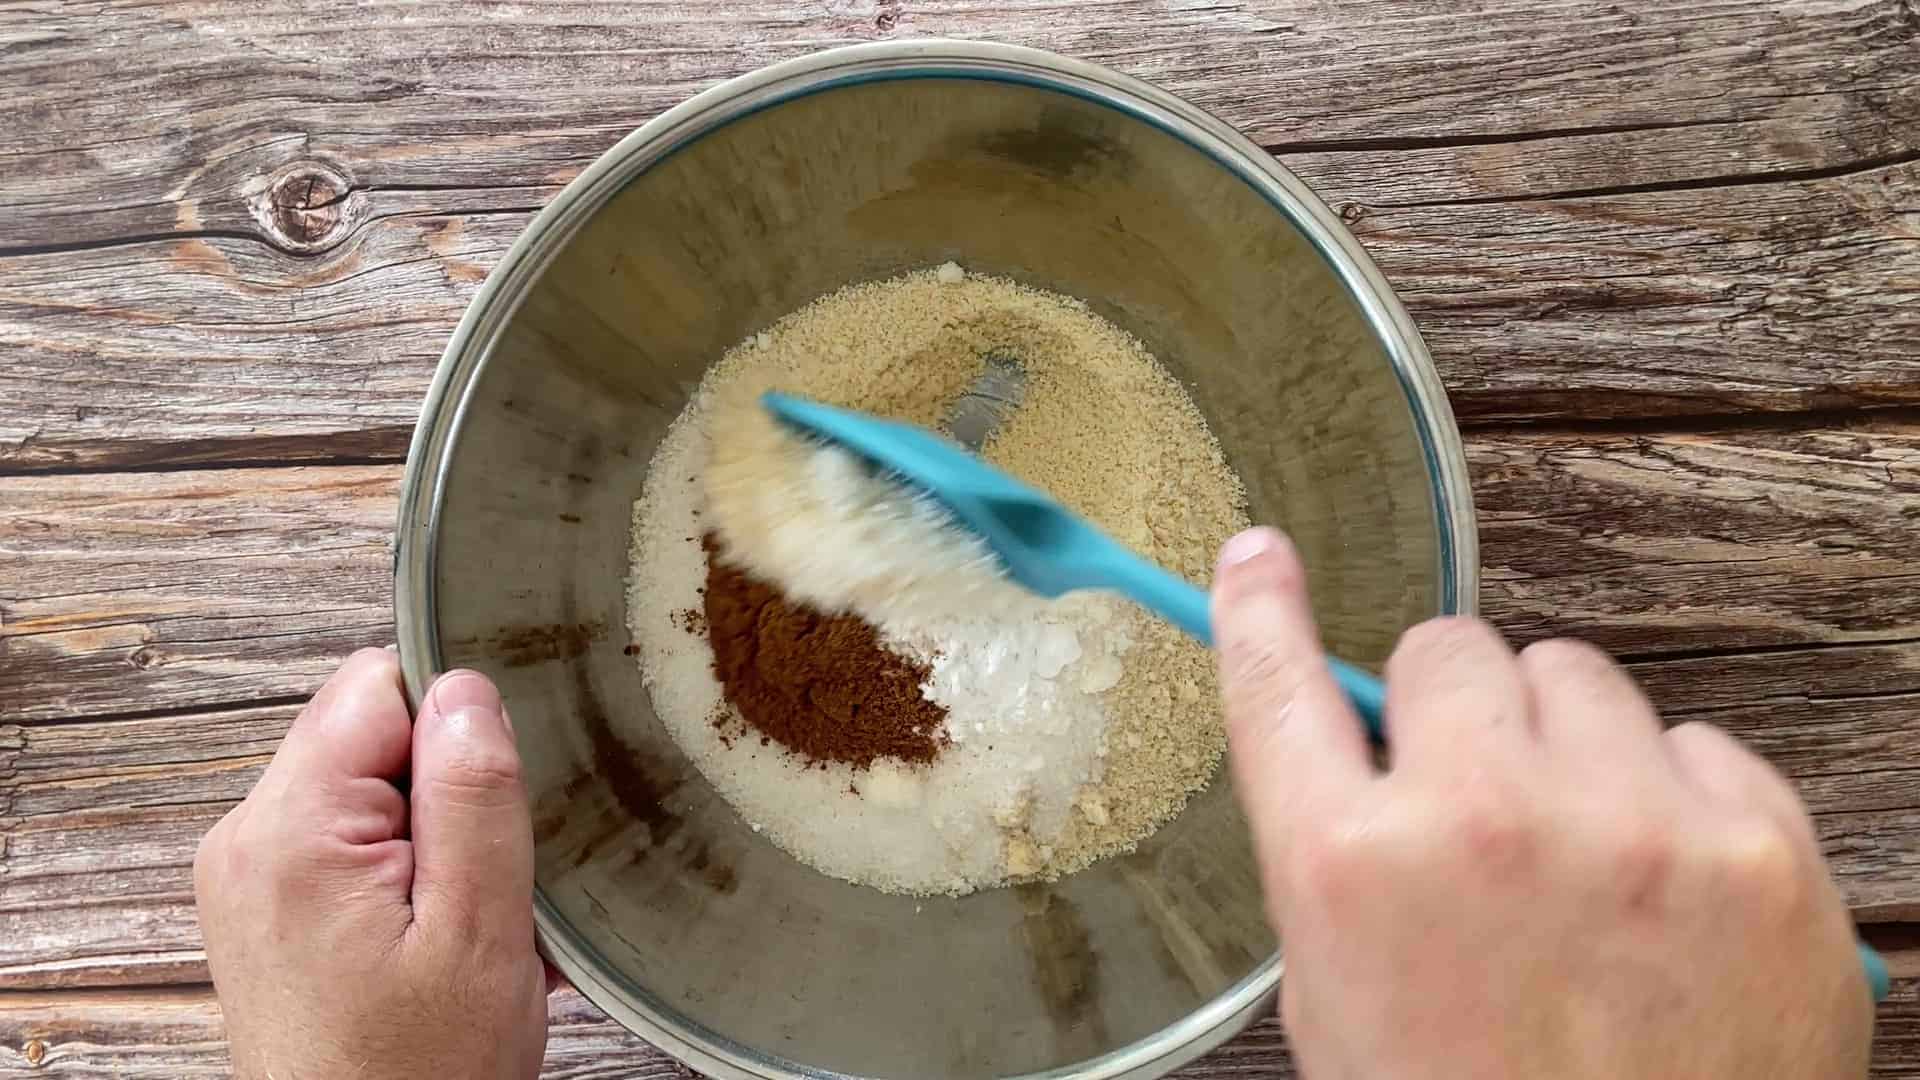 Mixing the dry ingredients in a large metal bowl